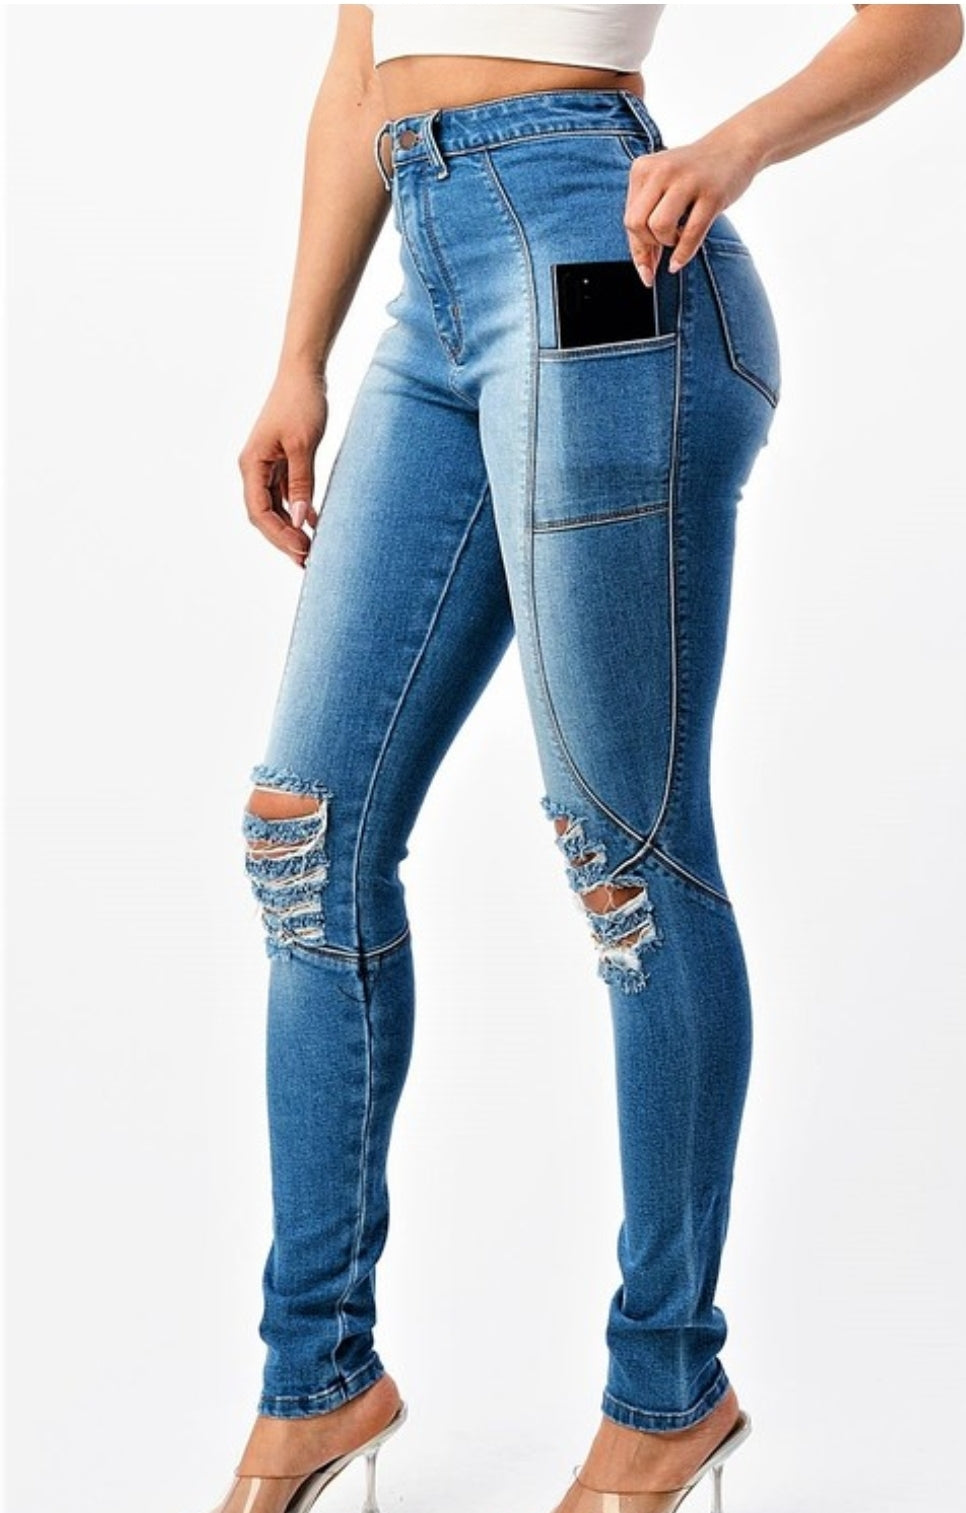 Distressed Jeans ( sizes 7-11)